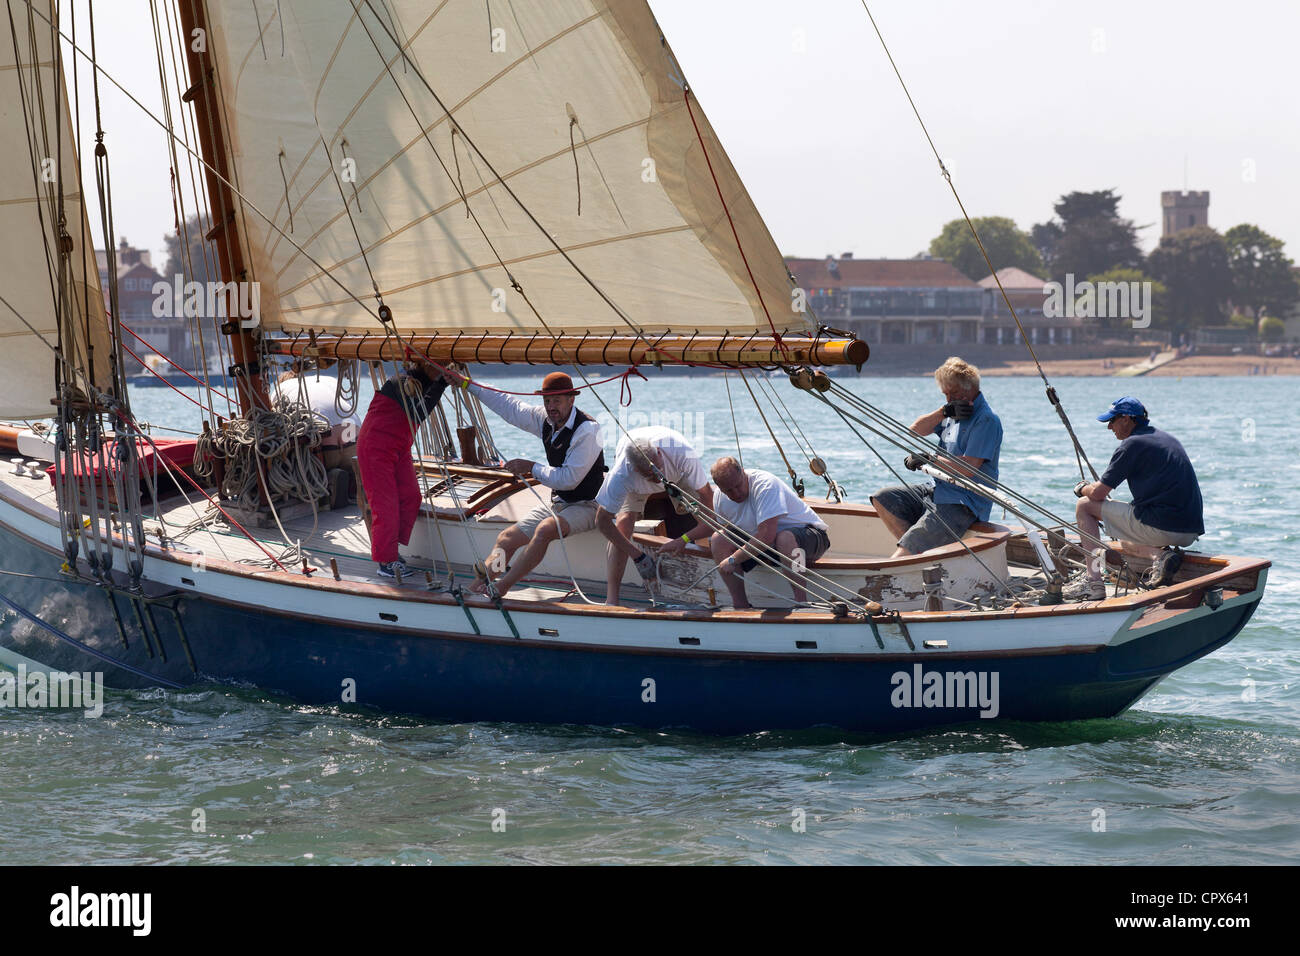 Old Gaffer tanned sail sailing in Yarmouth Festival Jubilee nostalgic Celebrations Stock Photo